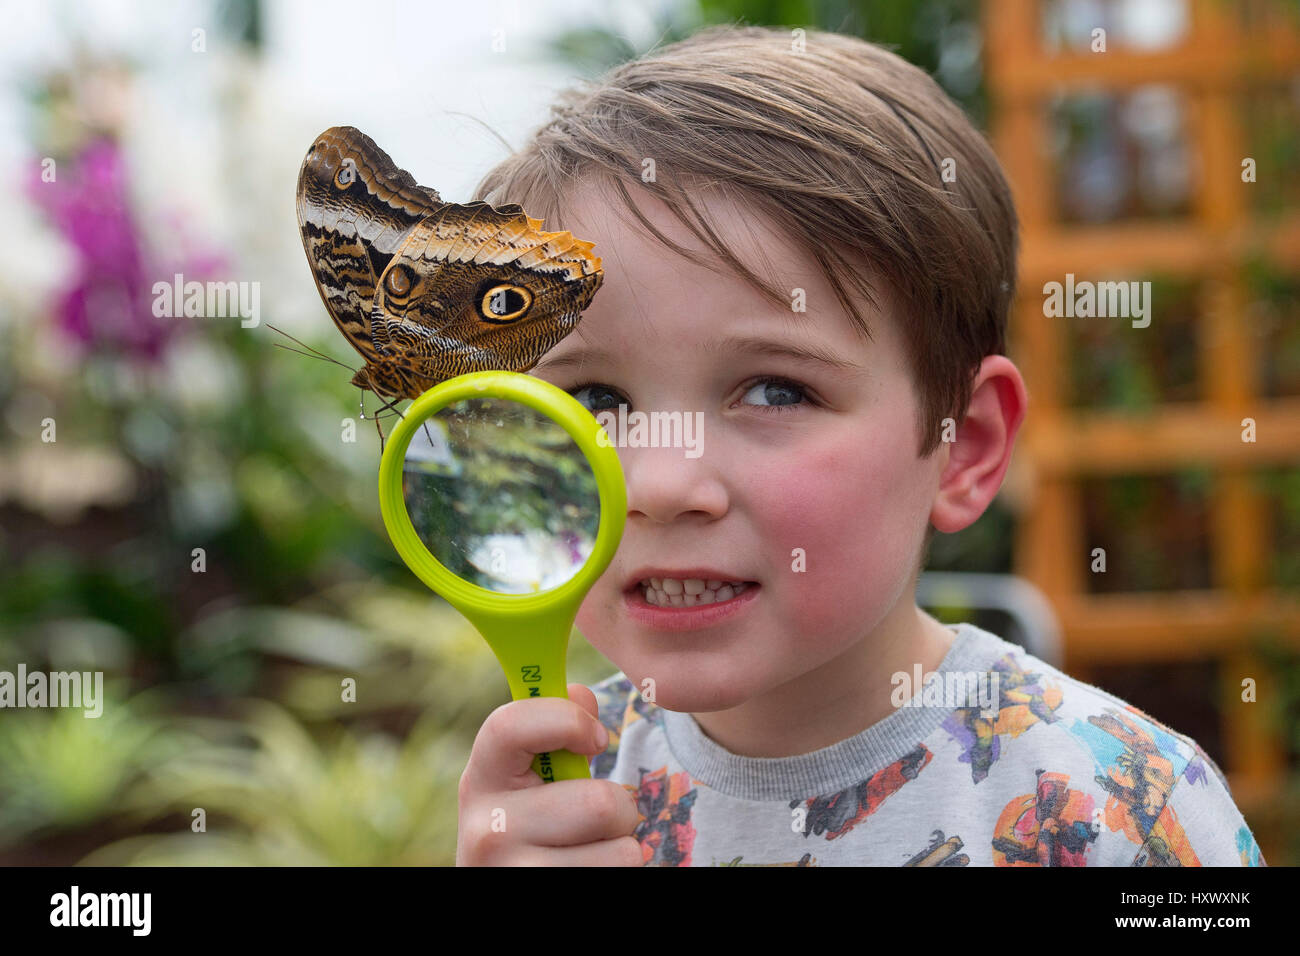 George Lewis, aged 5, poses with an Owl butterfly during a photocall to launch the Sensational Butterflies exhibition at the Natural History Museum in London. Stock Photo